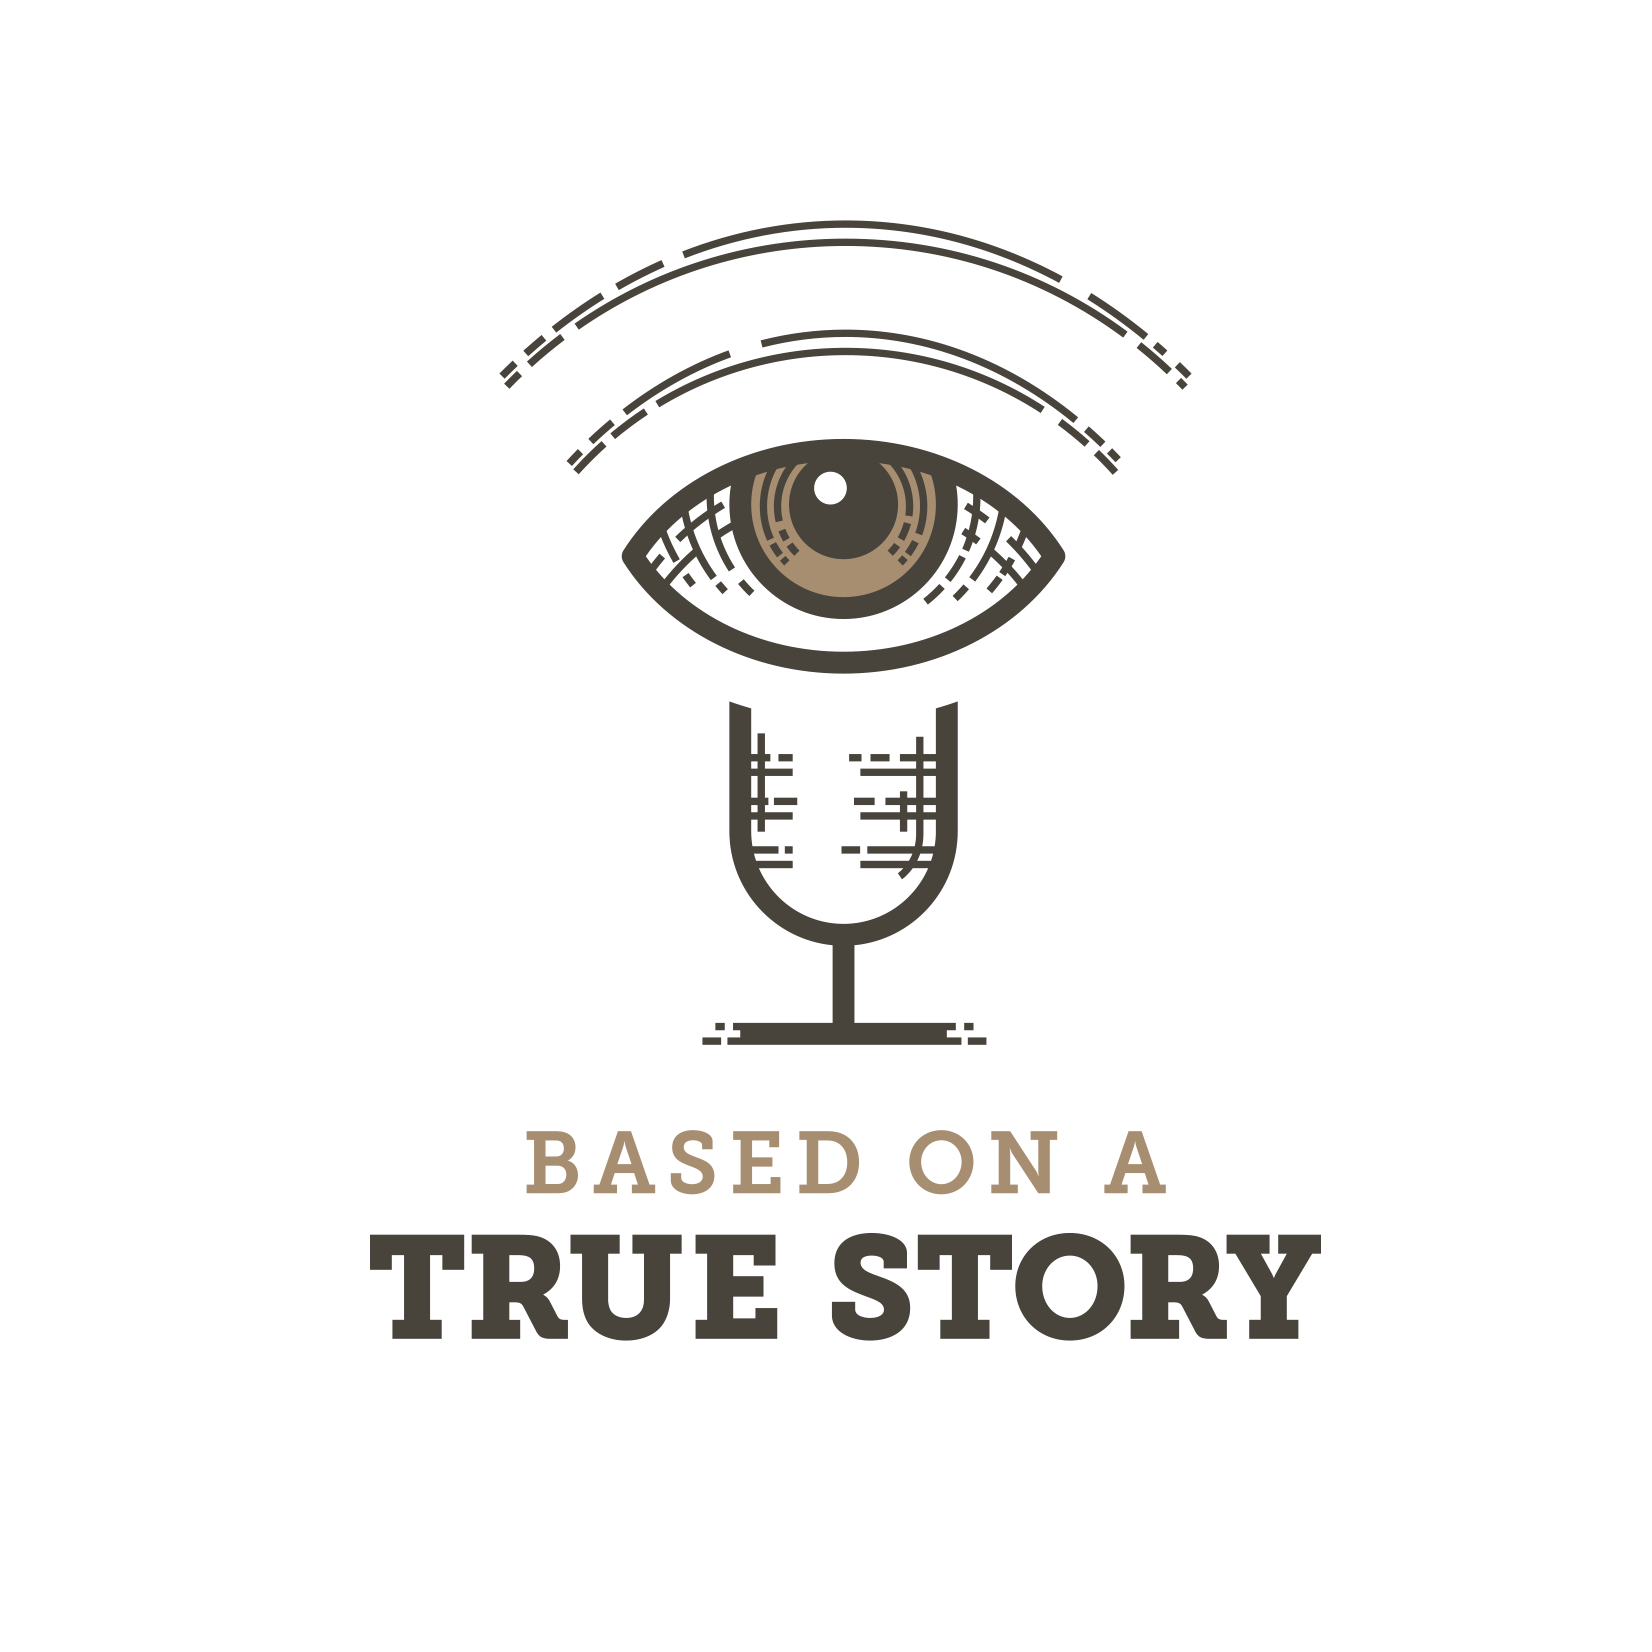 Based on a True Story with an Eye PNG HD pngteam.com